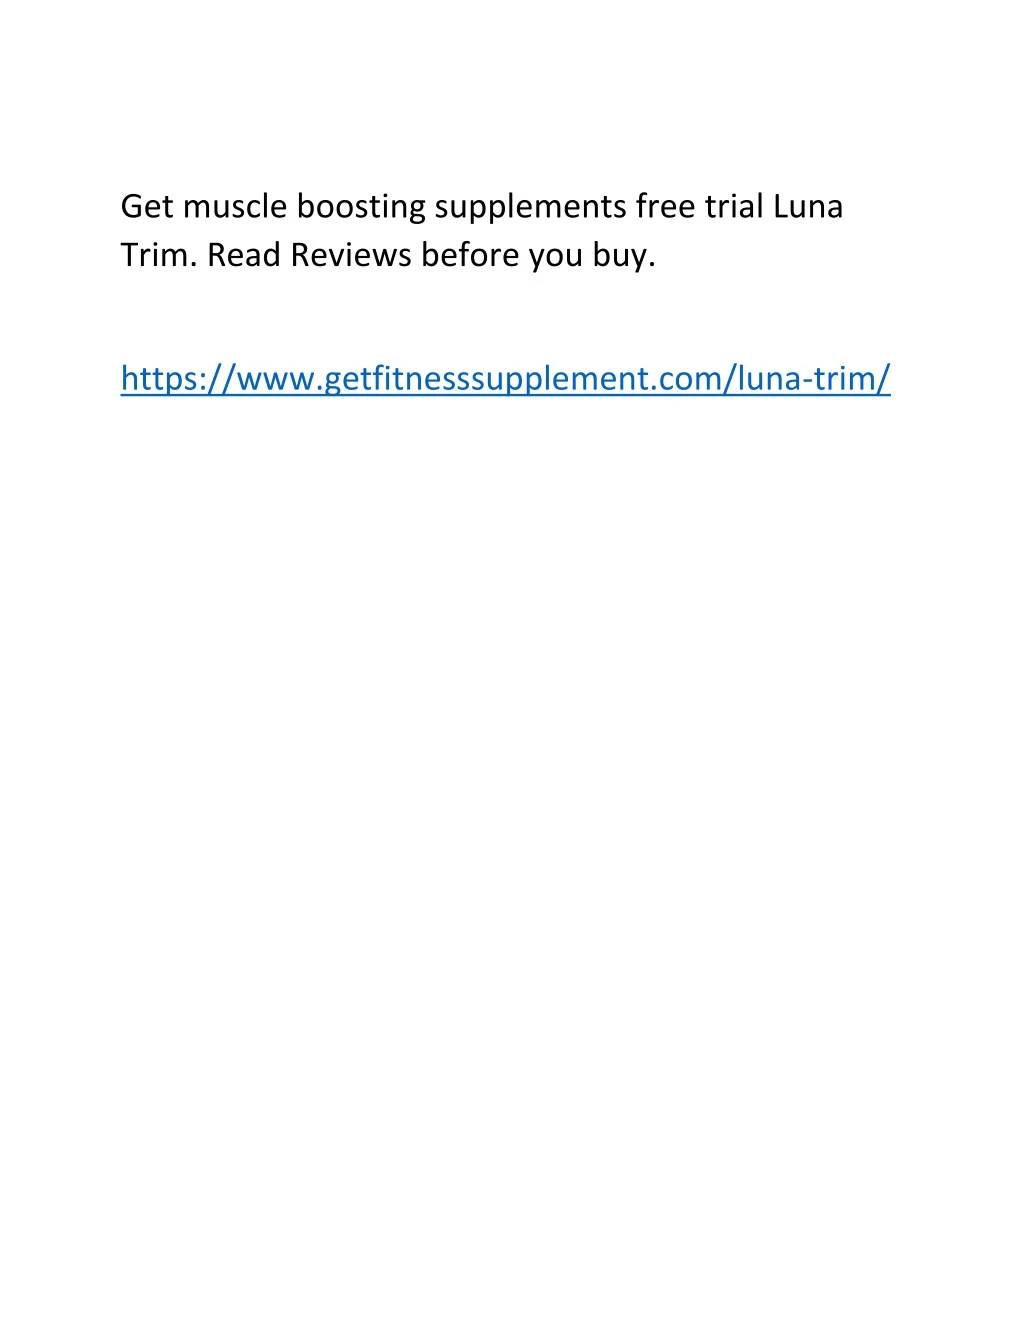 get muscle boosting supplements free trial luna